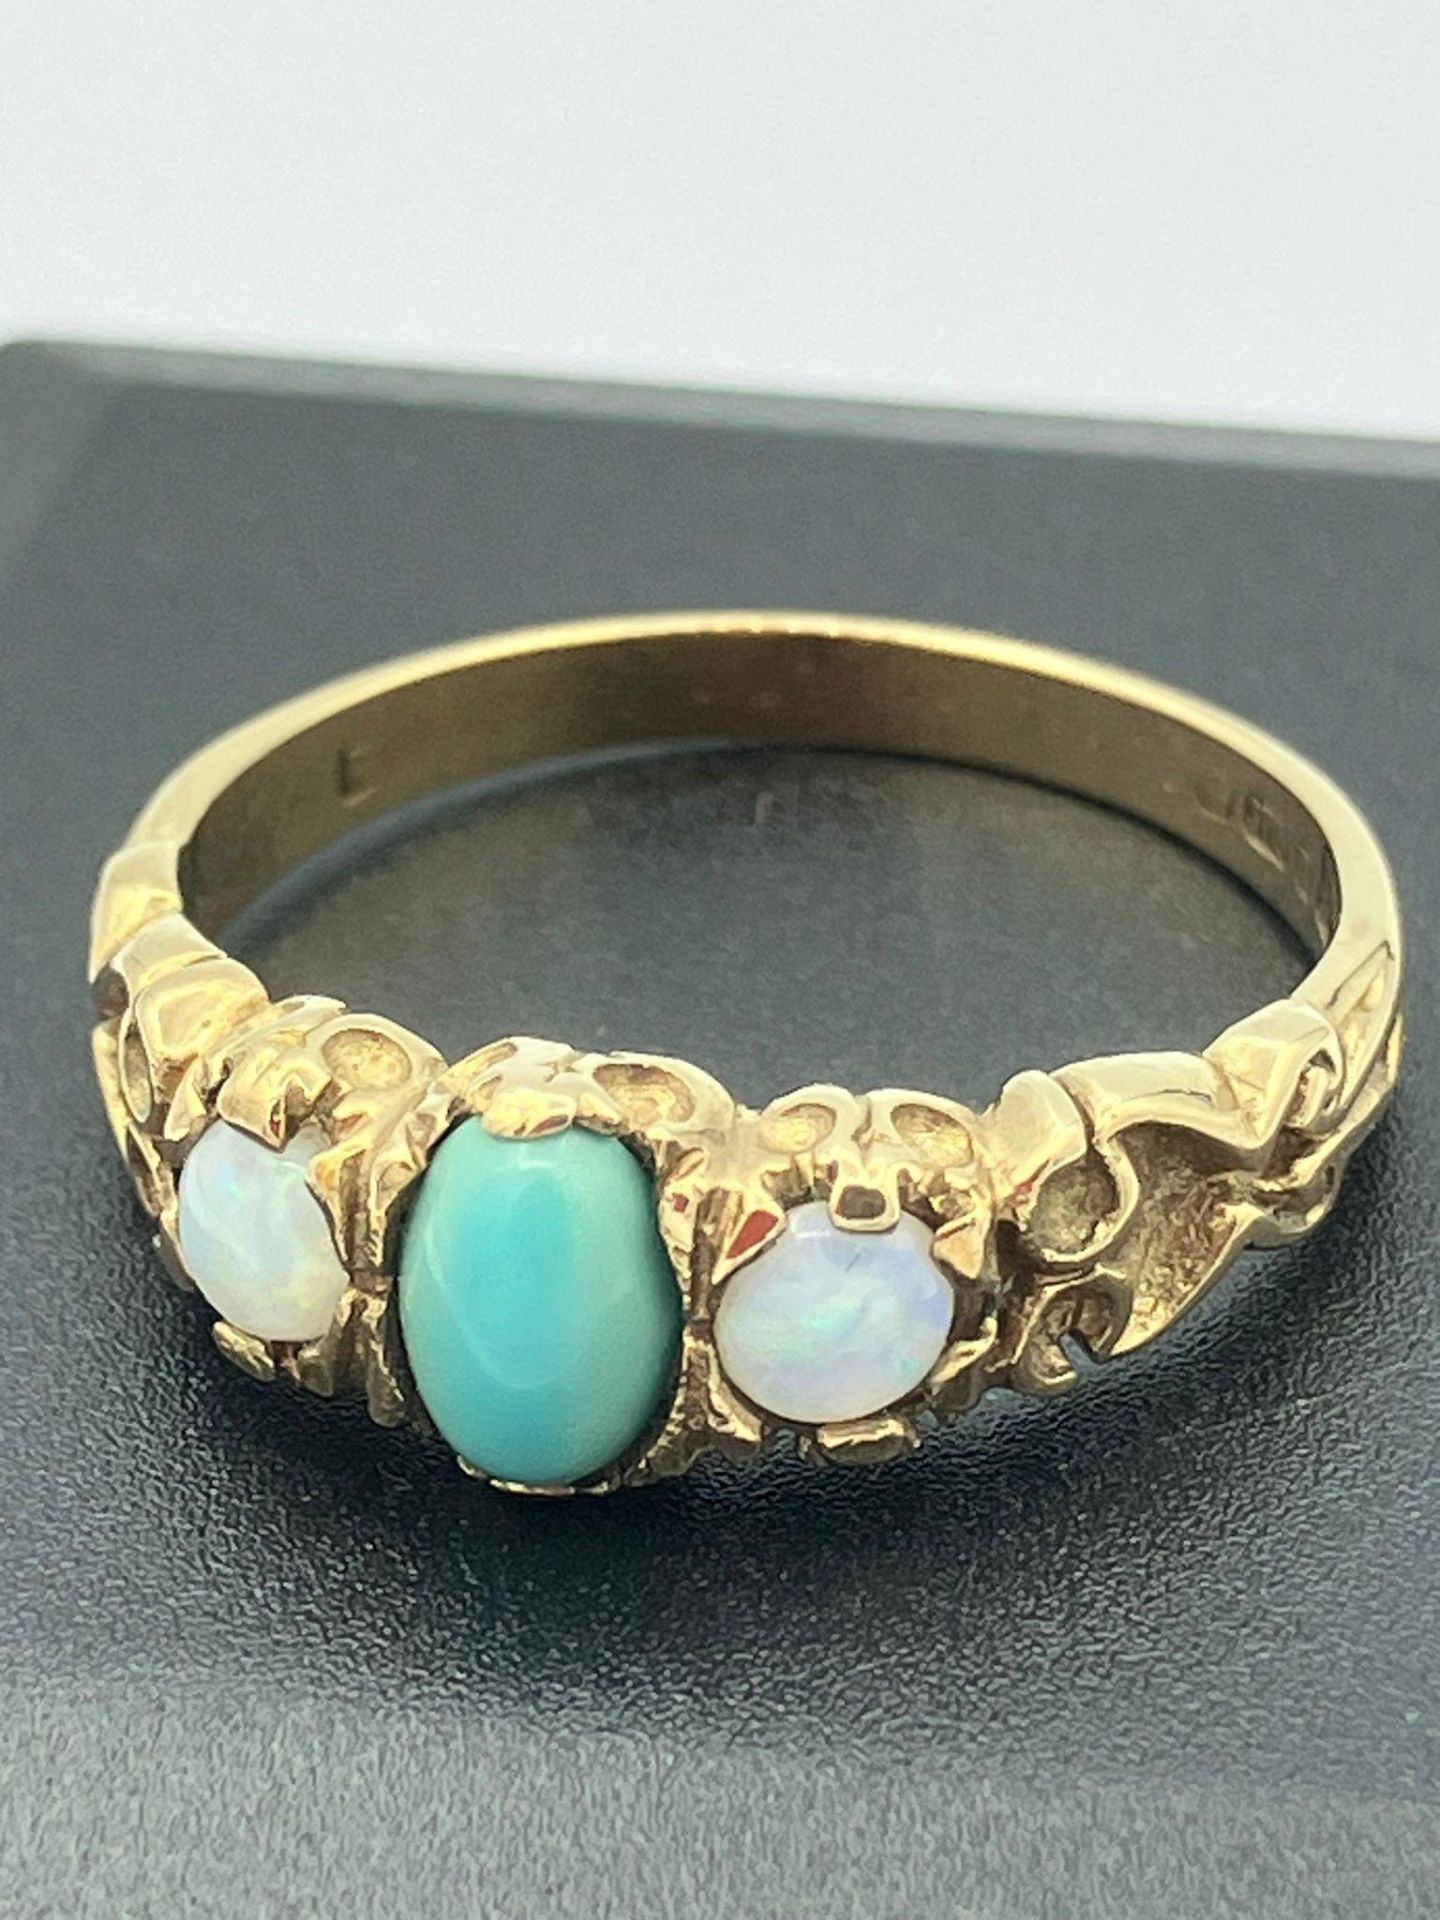 Hallmarked vintage 9 carat GOLD RING Having TURQUOISE and OPAL gemstones set to top. Complete with